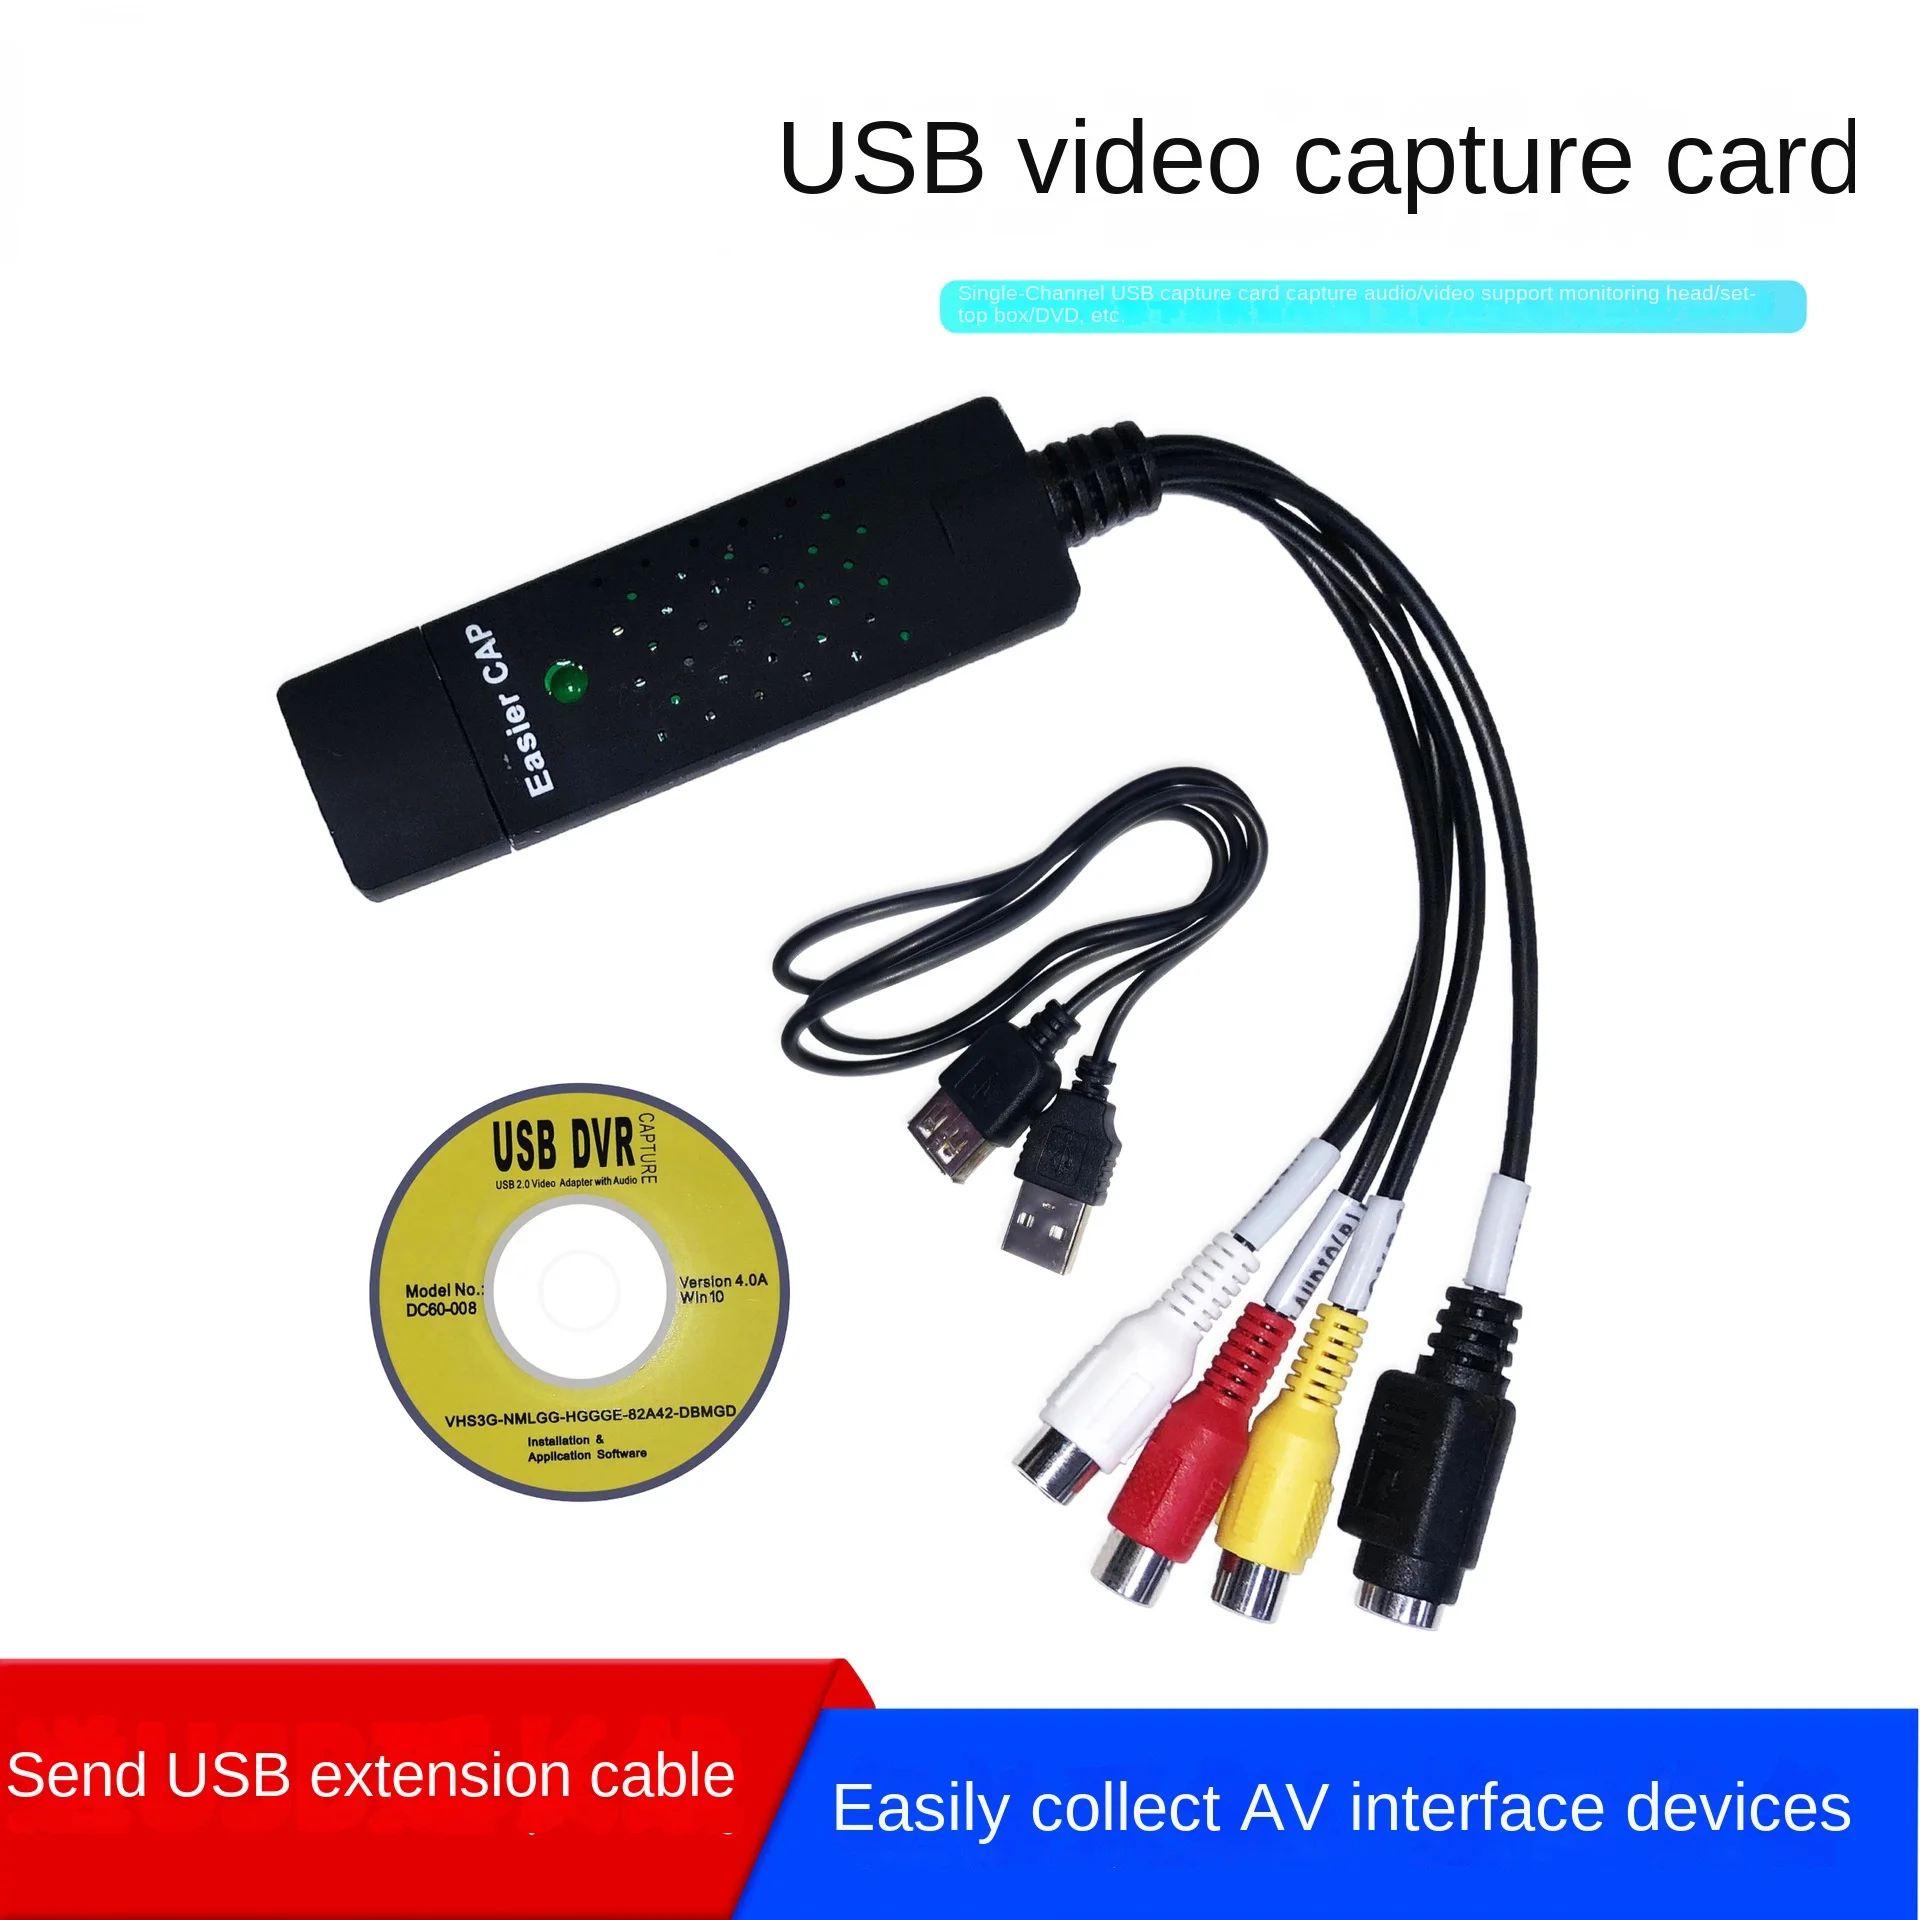 The new USB video acquisition card single channel USB acquisition card AV signal capture monitoring video acquisition